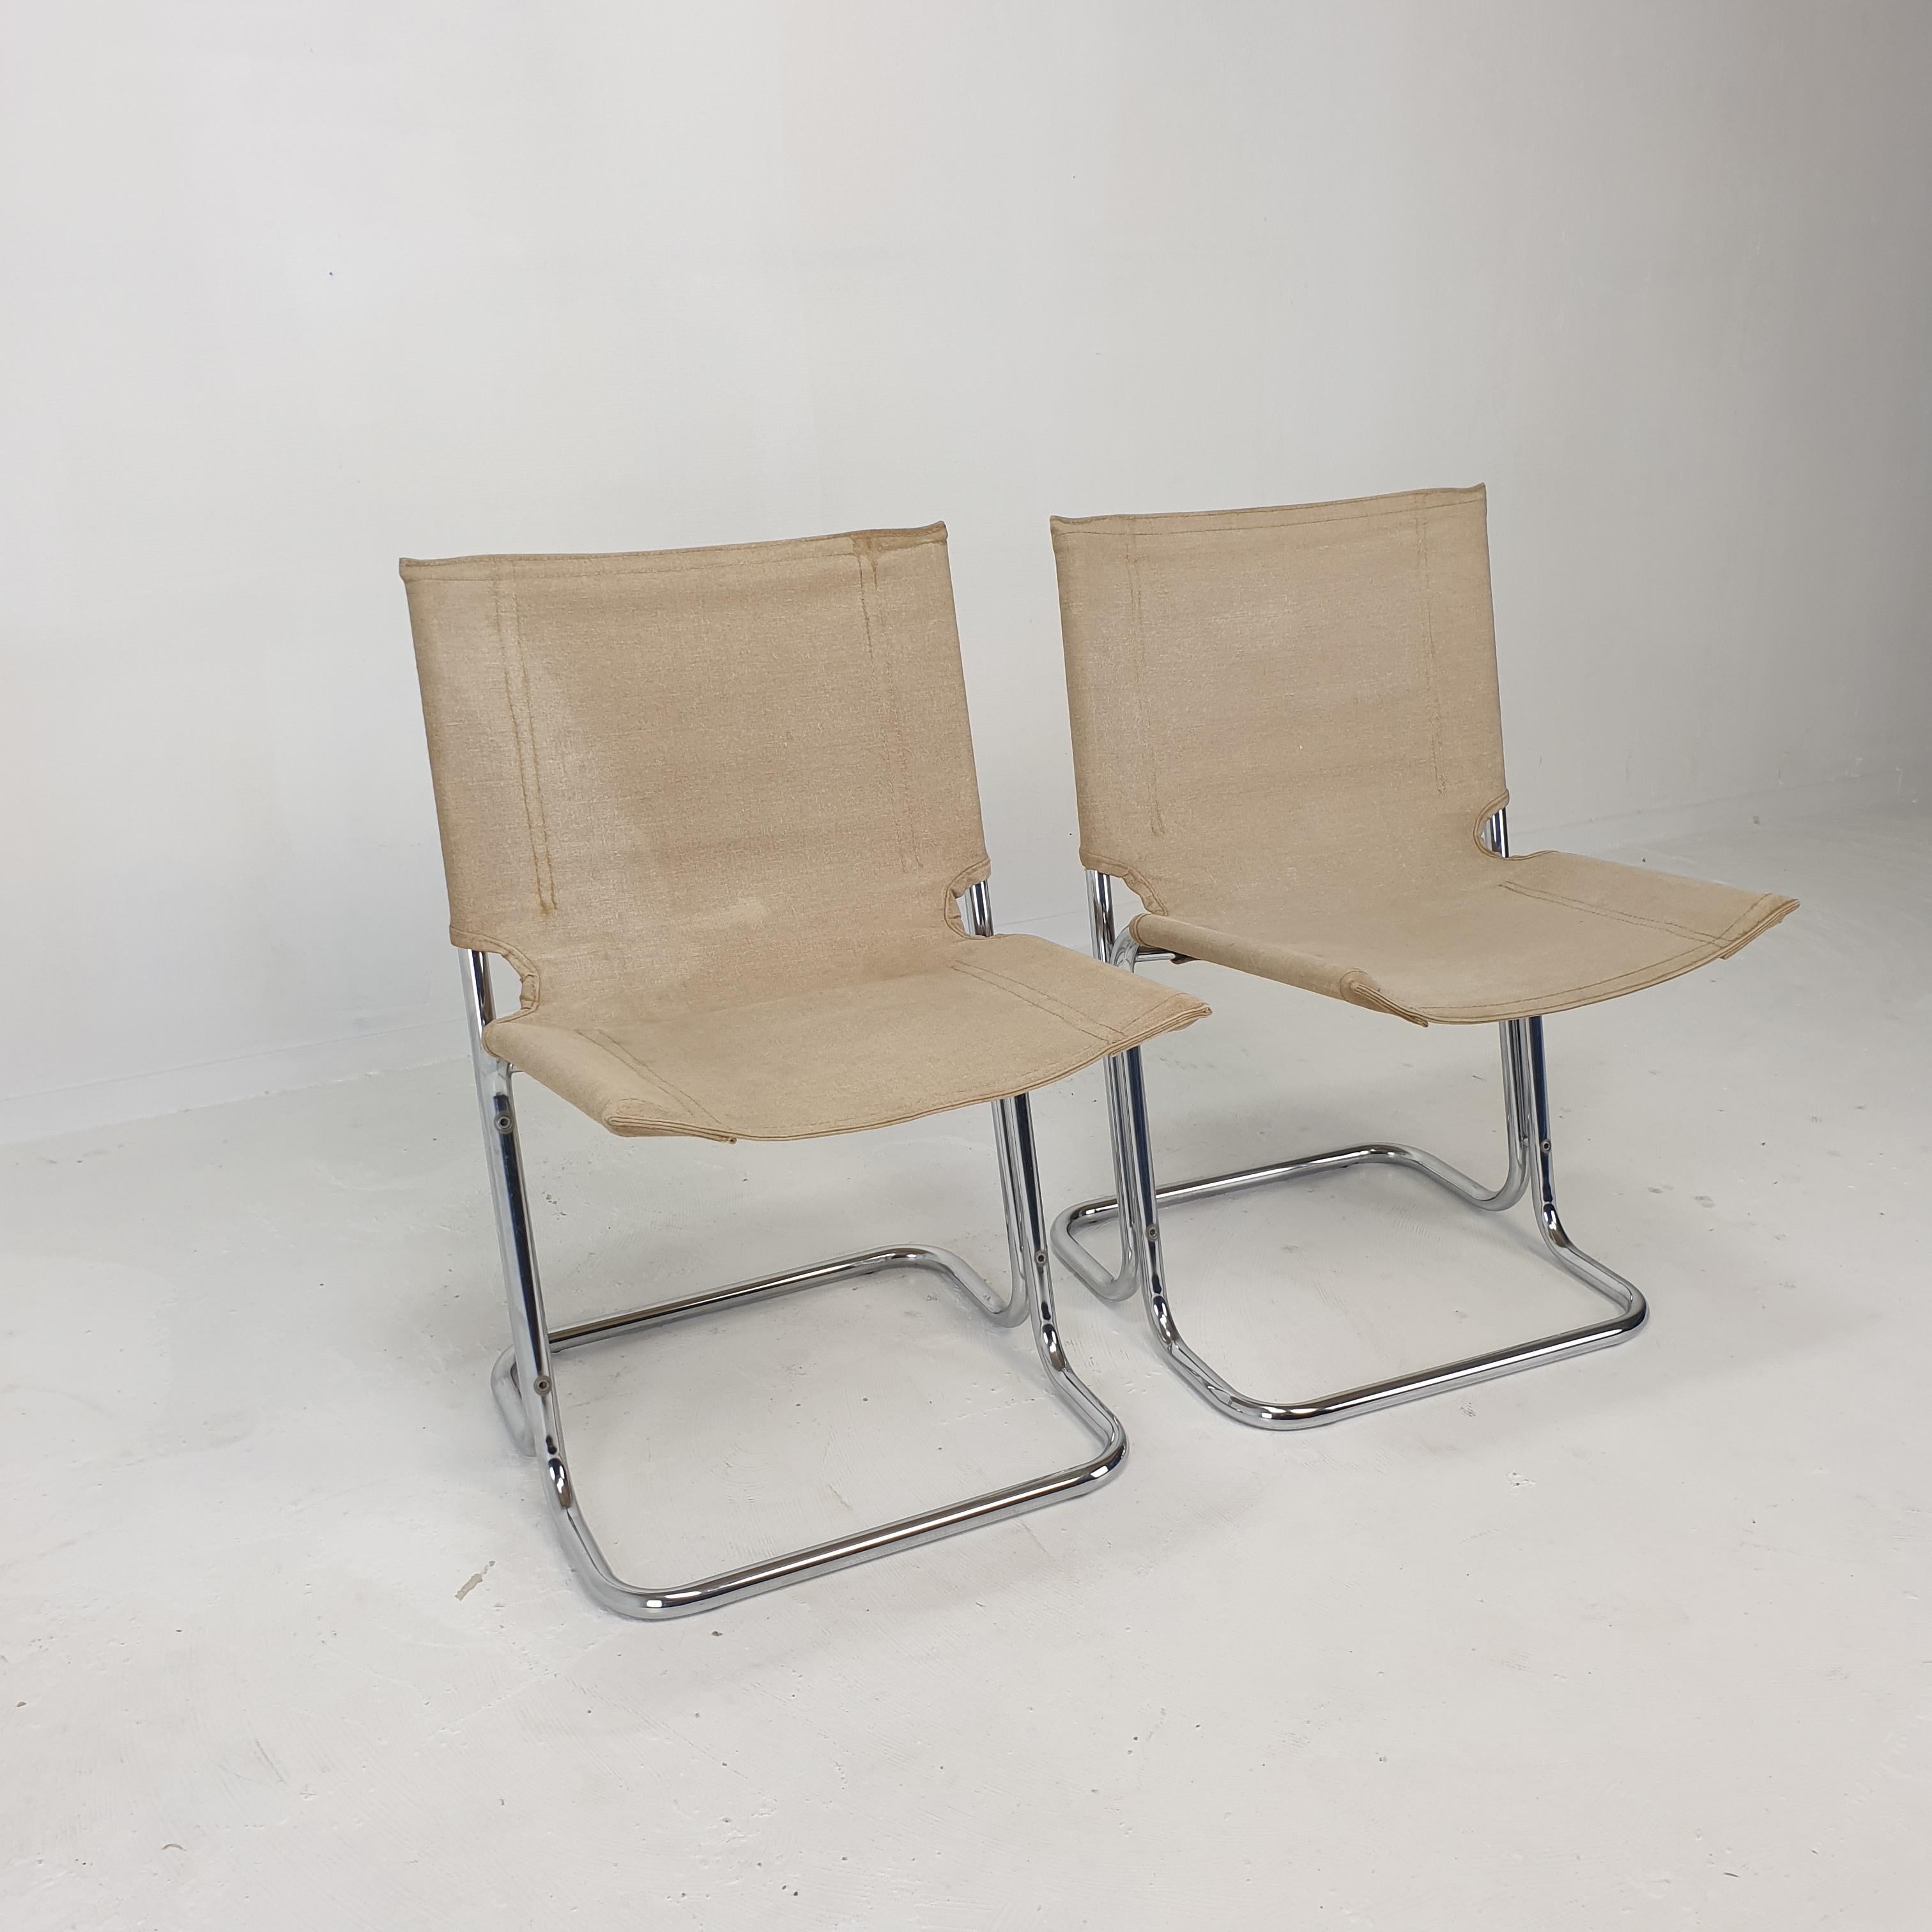 Set of 2 Italian Canvas and Chromed Metal Chairs, 1970's In Good Condition For Sale In Oud Beijerland, NL